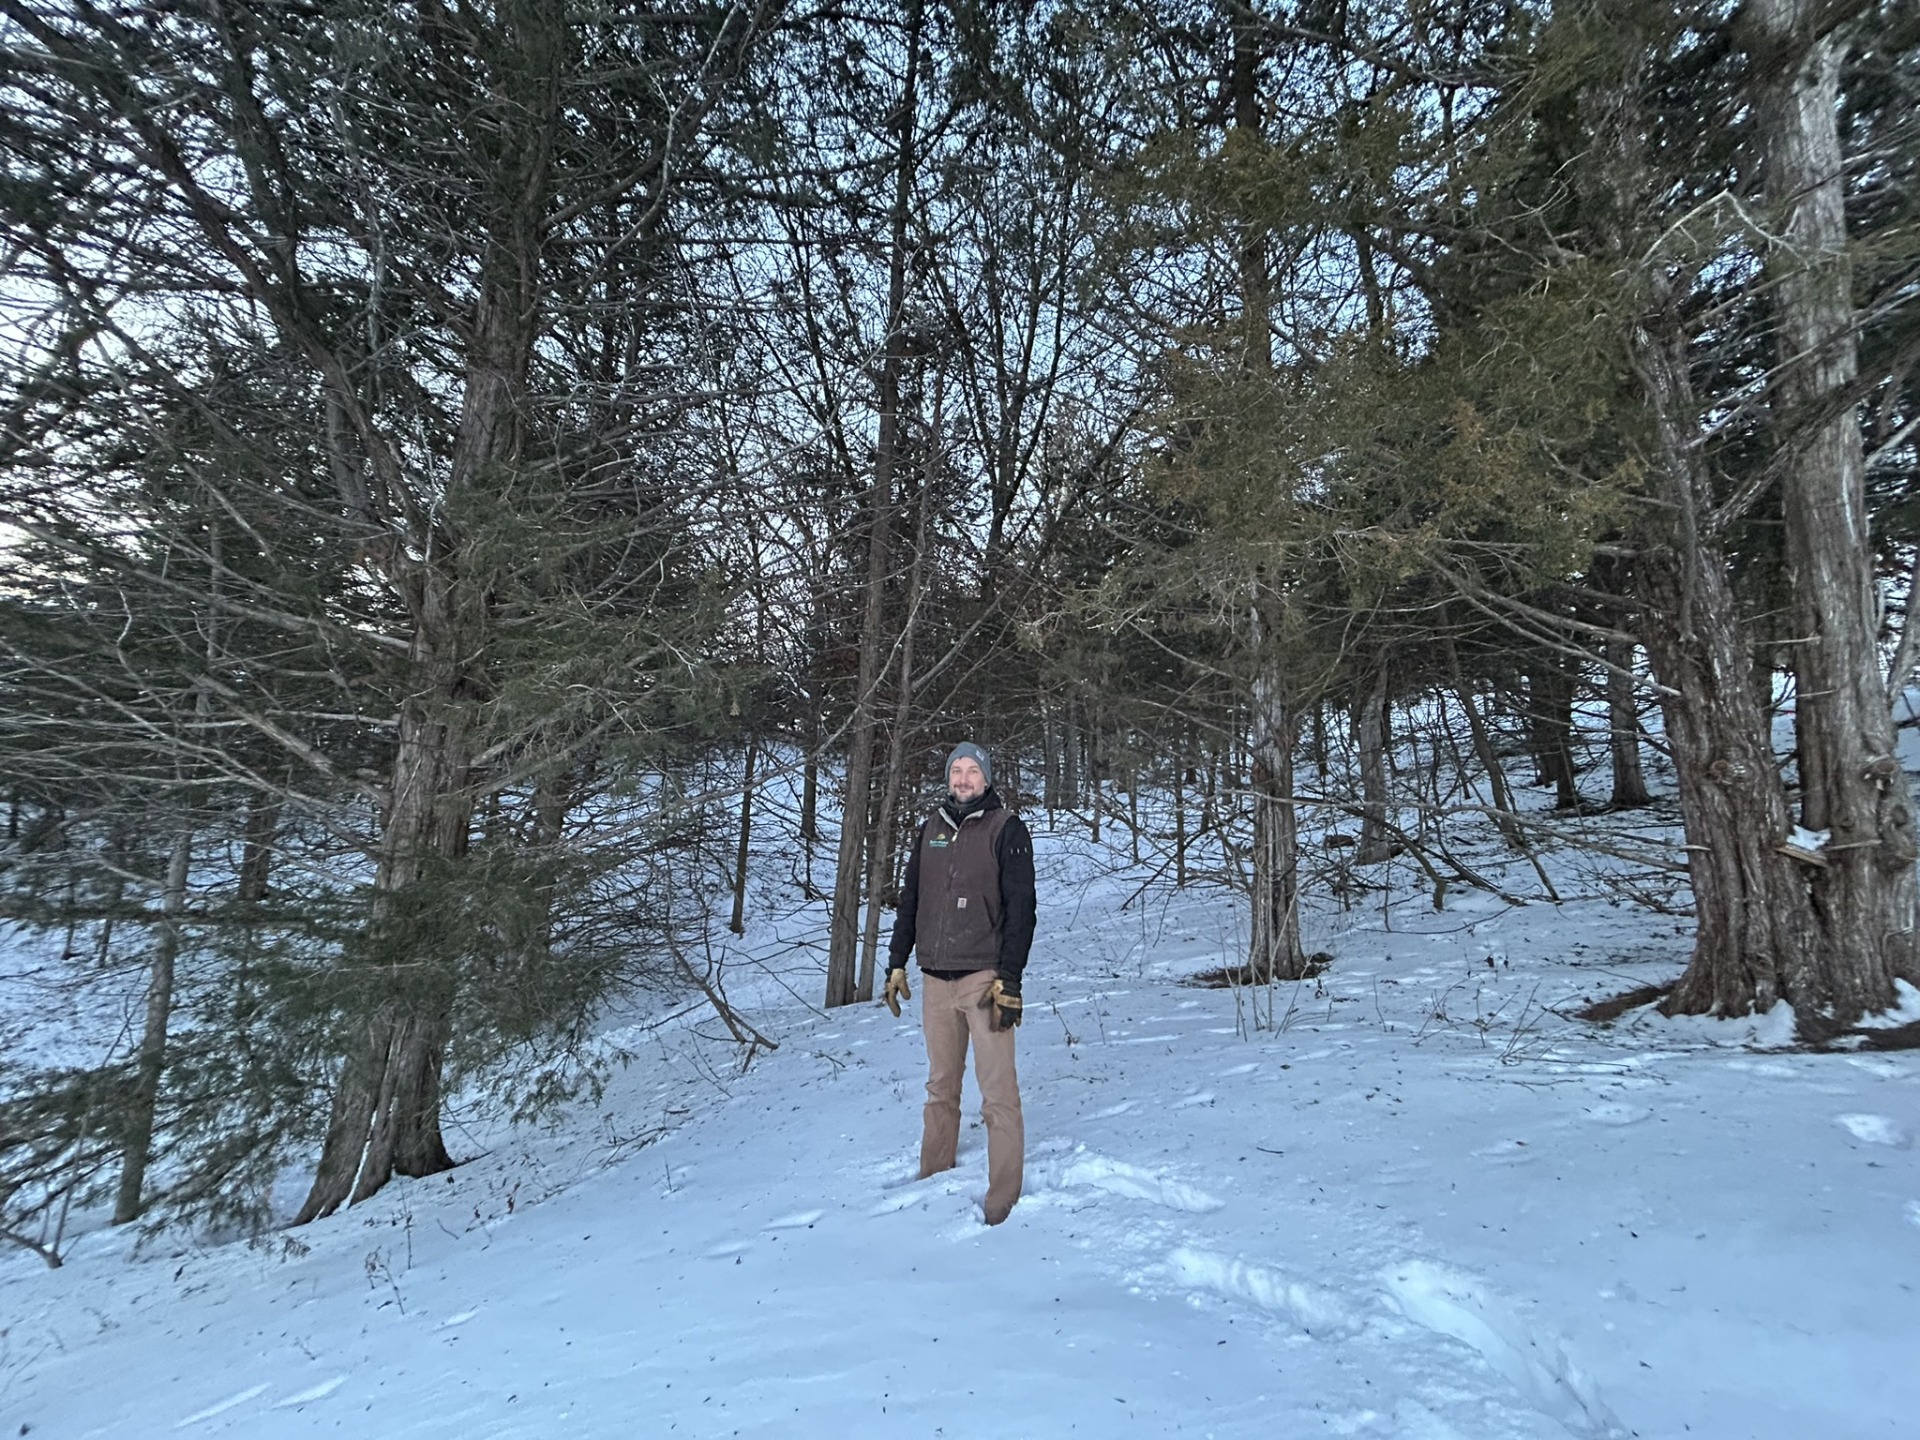 Natural Areas Management technician Aric stands in an area of thick Eastern Red Cedar trees at Mt. Crescent.